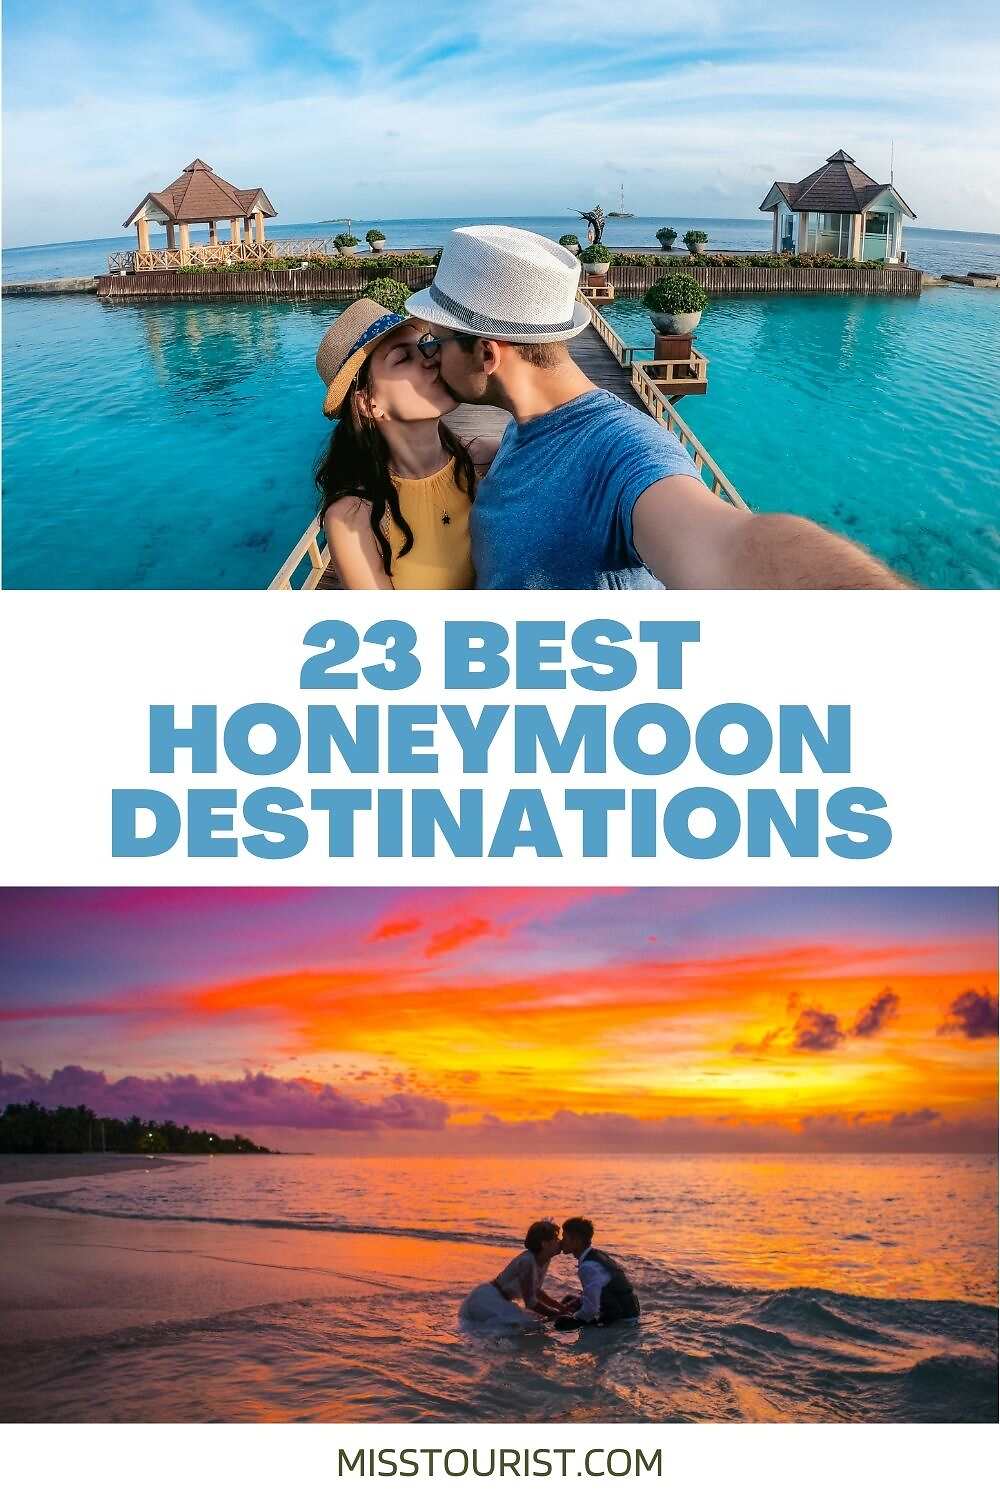 A couple kisses on an overwater bungalow in the top image, while in the bottom image, a couple with a child enjoy a sunset on the beach. Text reads "23 Best Honeymoon Destinations.